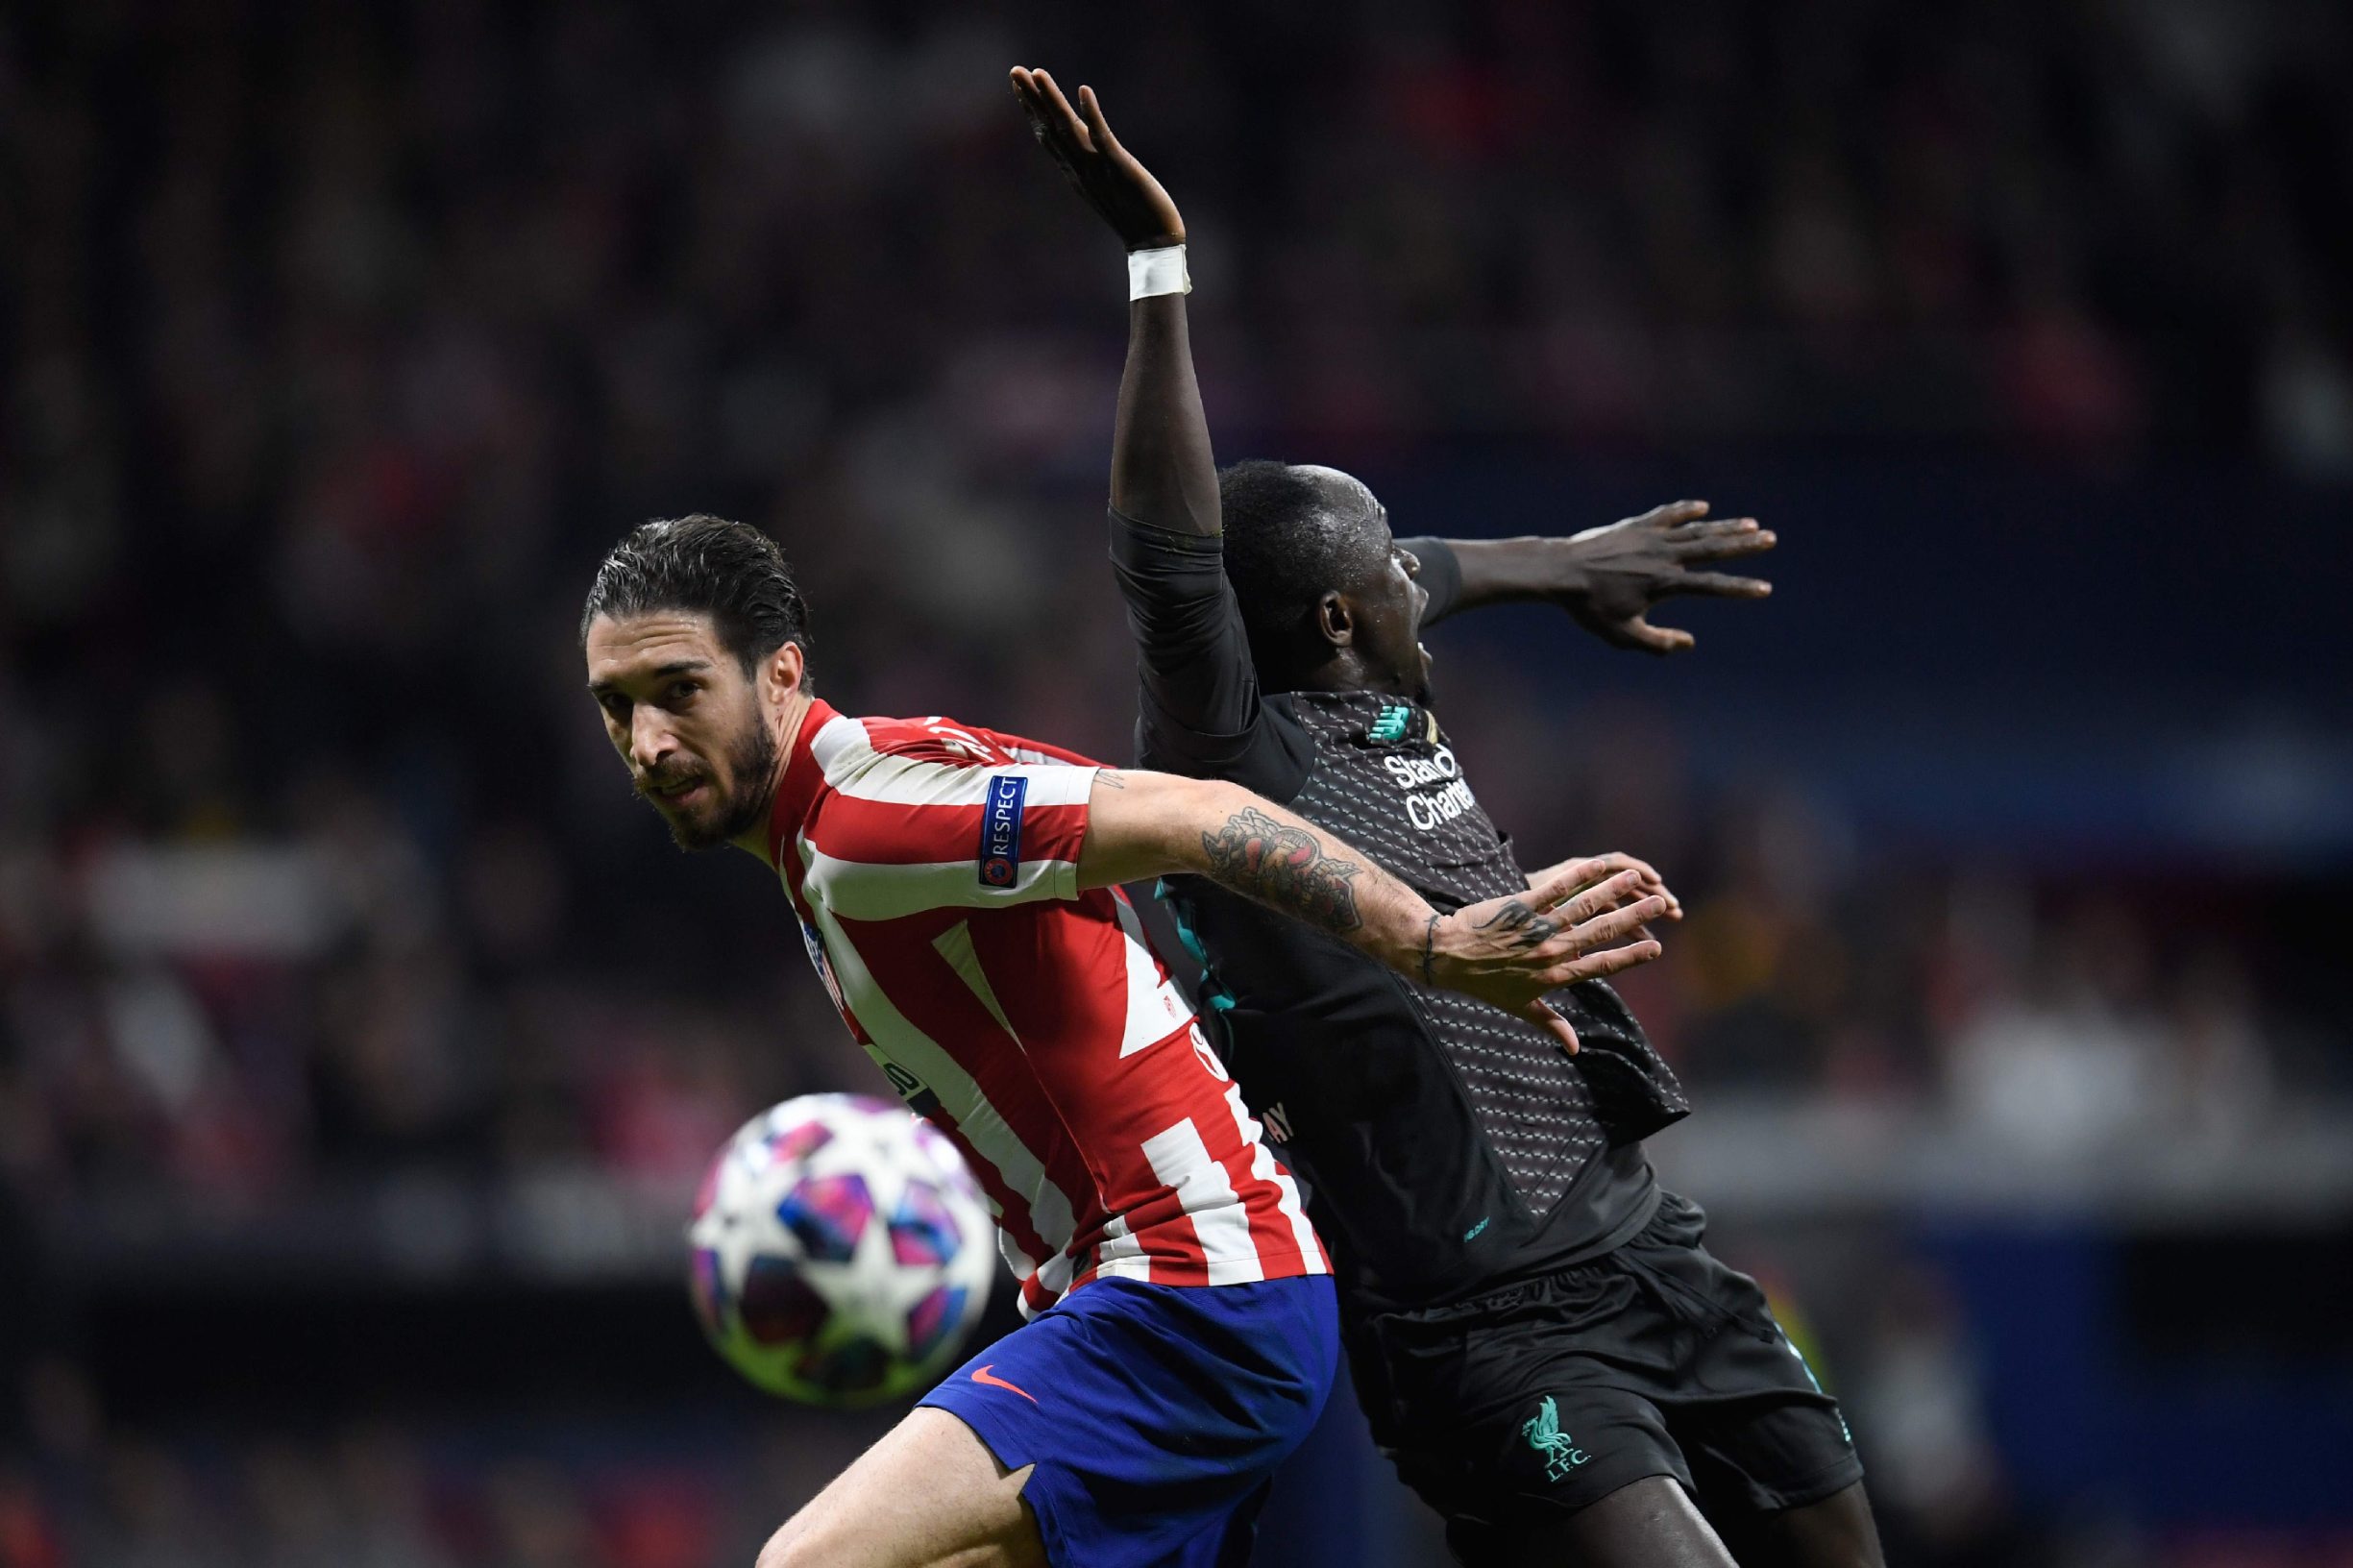 Liverpool's Senegalese striker Sadio Mane (R) challenges Atletico Madrid's Croatian defender Sime Vrsaljko during the UEFA Champions League, round of 16, first leg football match between Club Atletico de Madrid and Liverpool FC at the Wanda Metropolitano stadium in Madrid on February 18, 2020. (Photo by OSCAR DEL POZO / AFP)